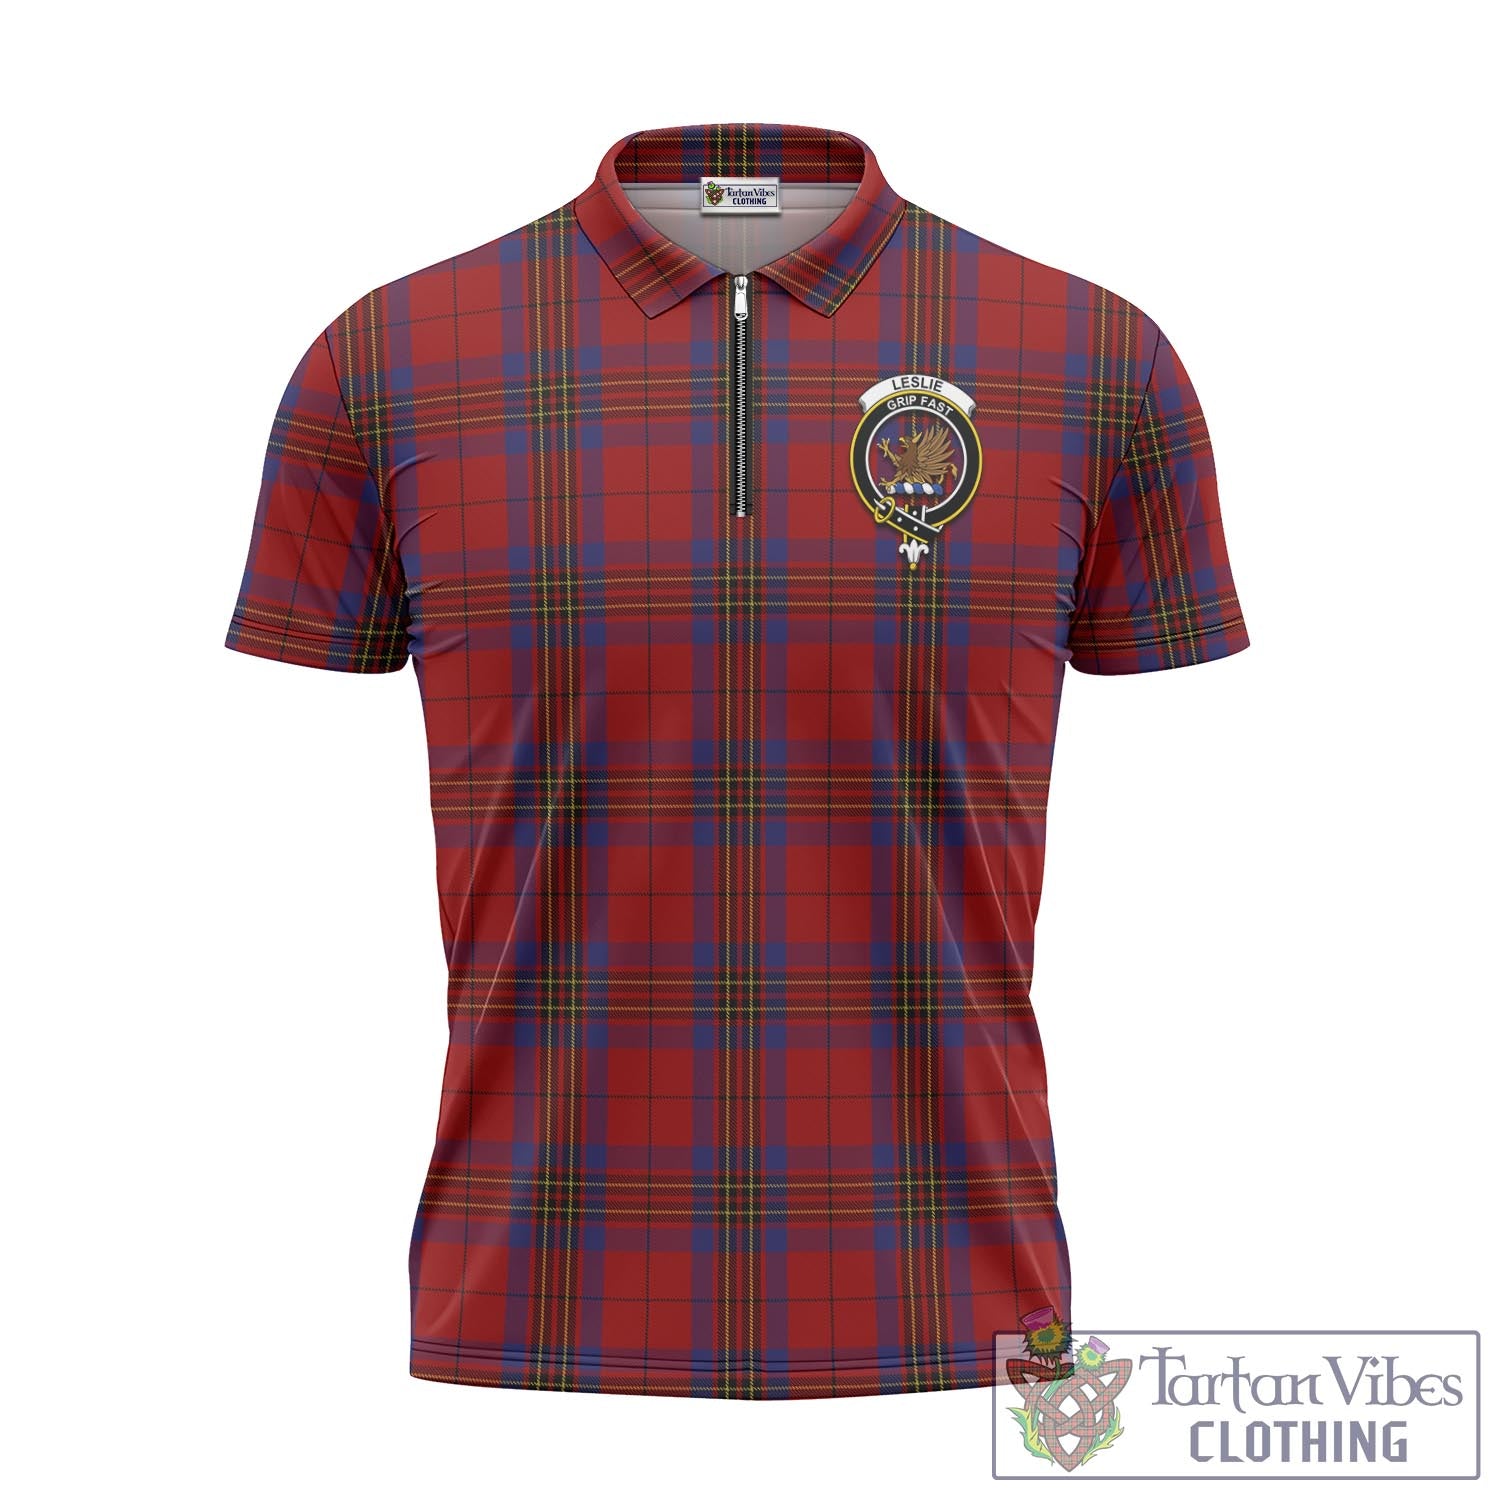 Tartan Vibes Clothing Leslie Red Tartan Zipper Polo Shirt with Family Crest